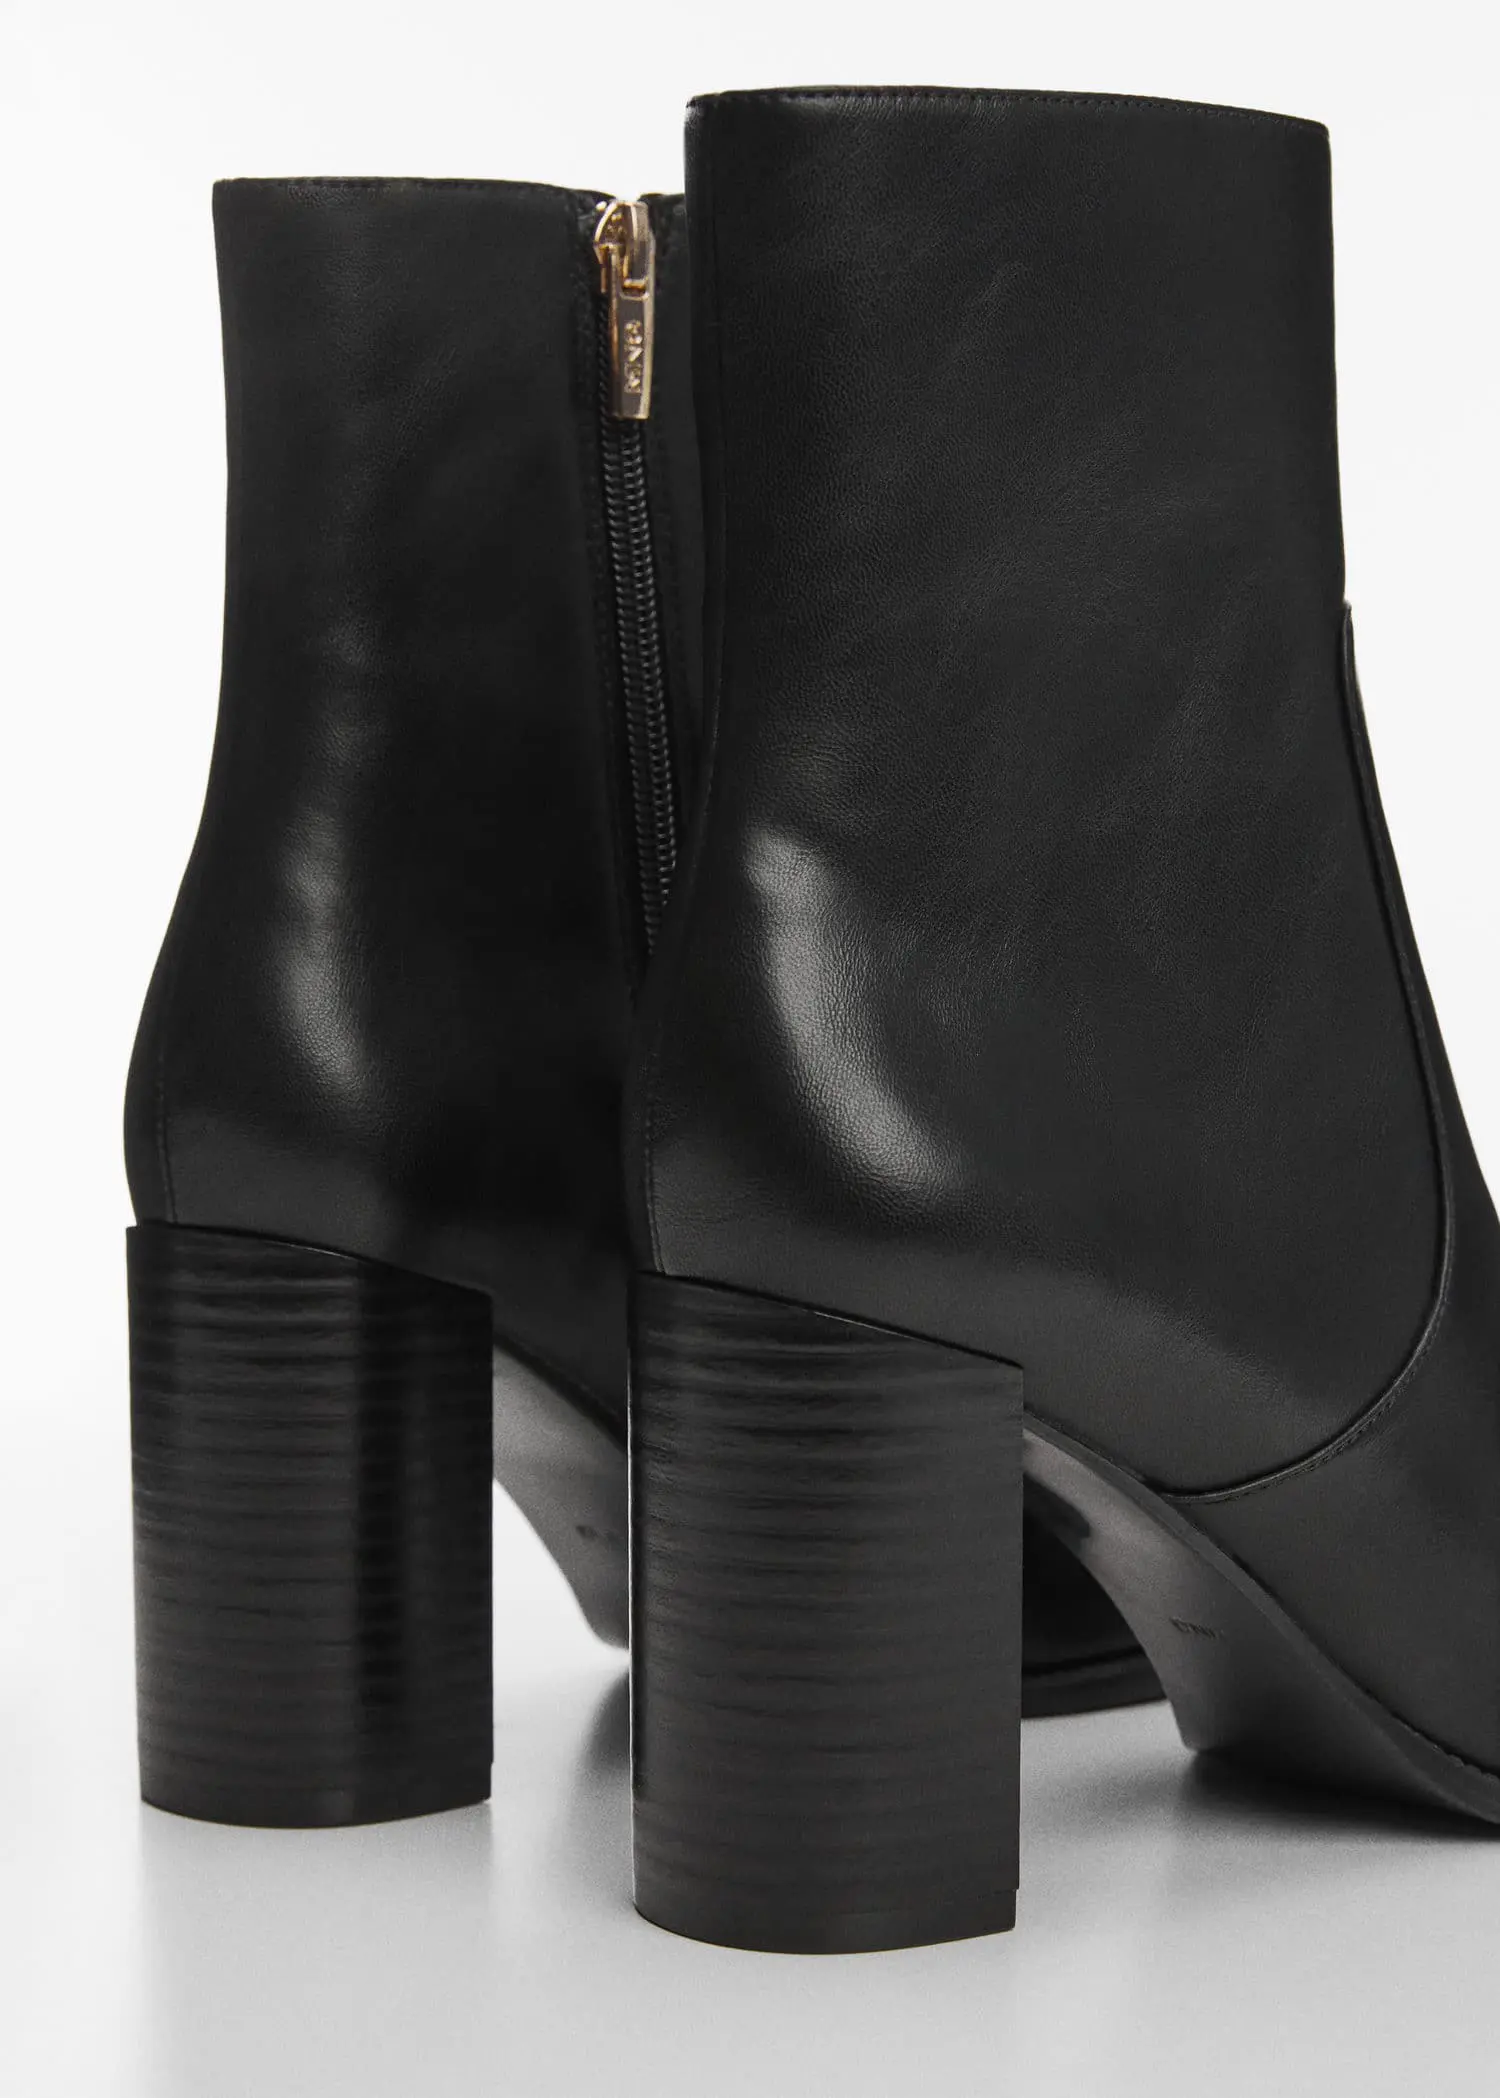 Mango Pointed heel ankle boot. 3